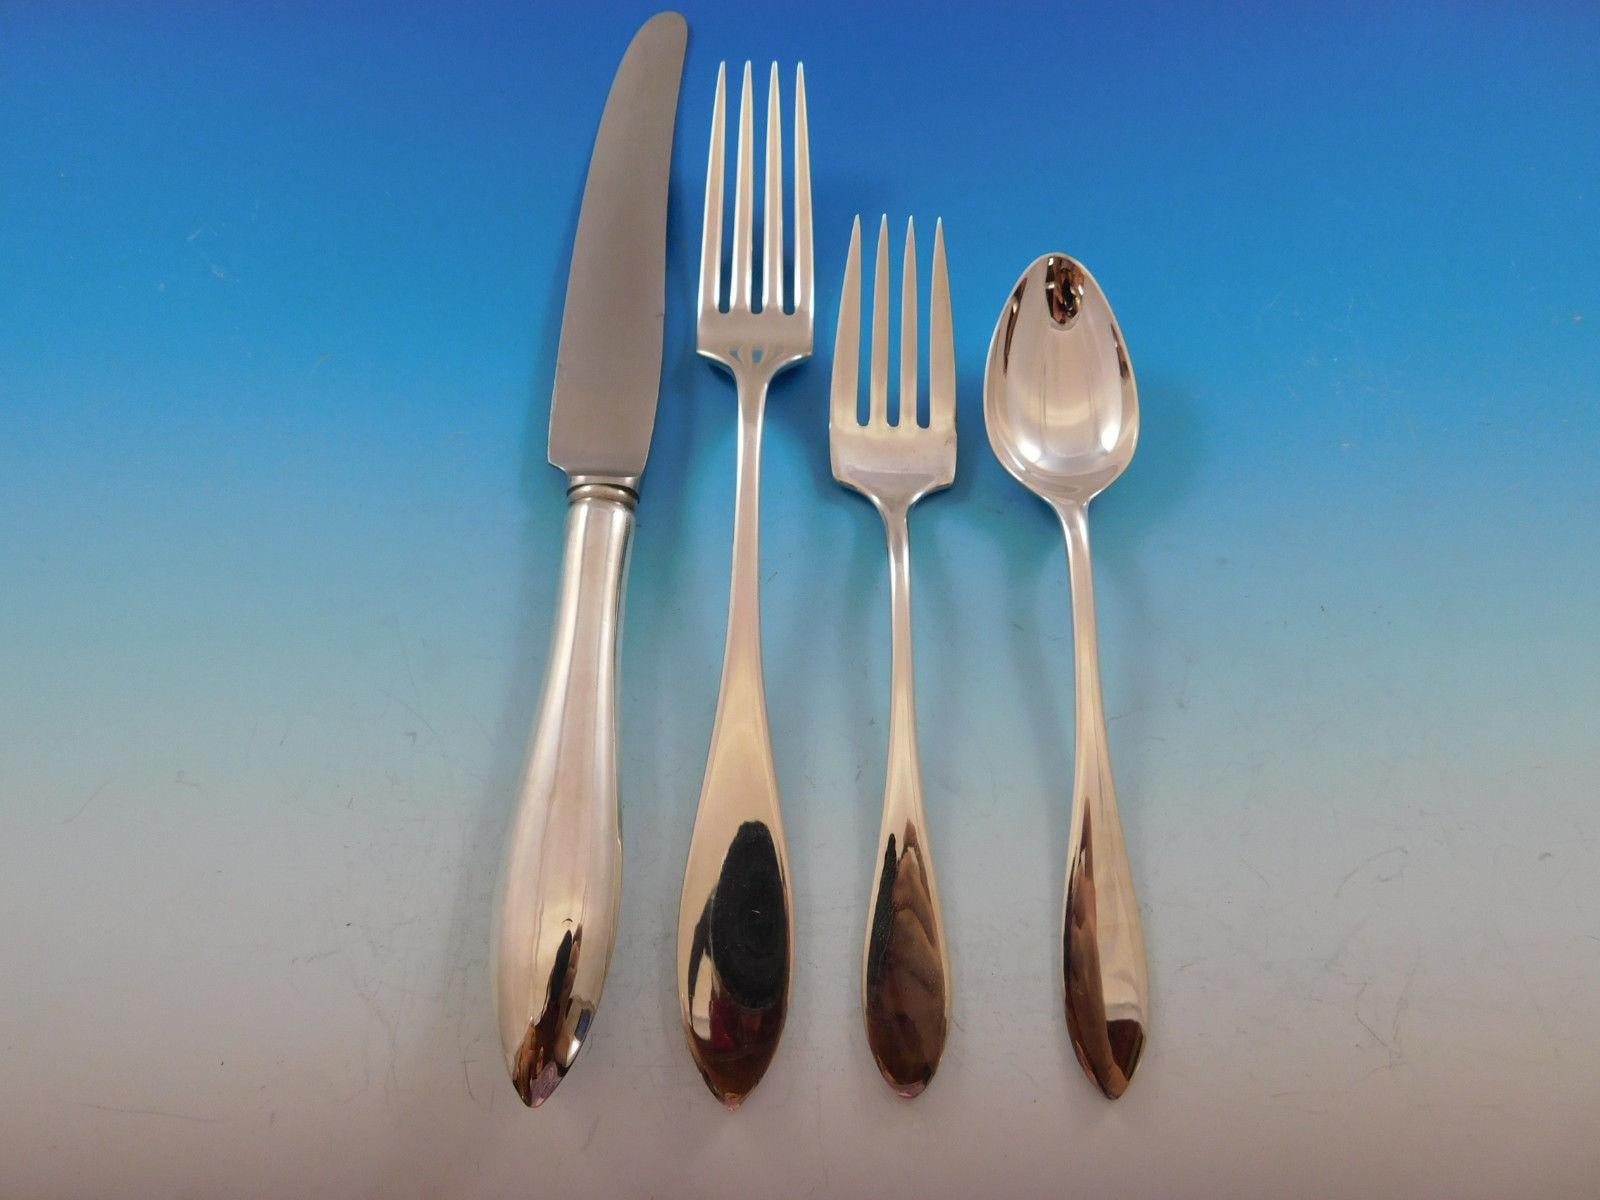 Dinner size timeless, simple, and unadorned Lafayette by Towle sterling silver flatware set - 57 pieces. This set includes:

Eight dinner size knives, 9 3/4